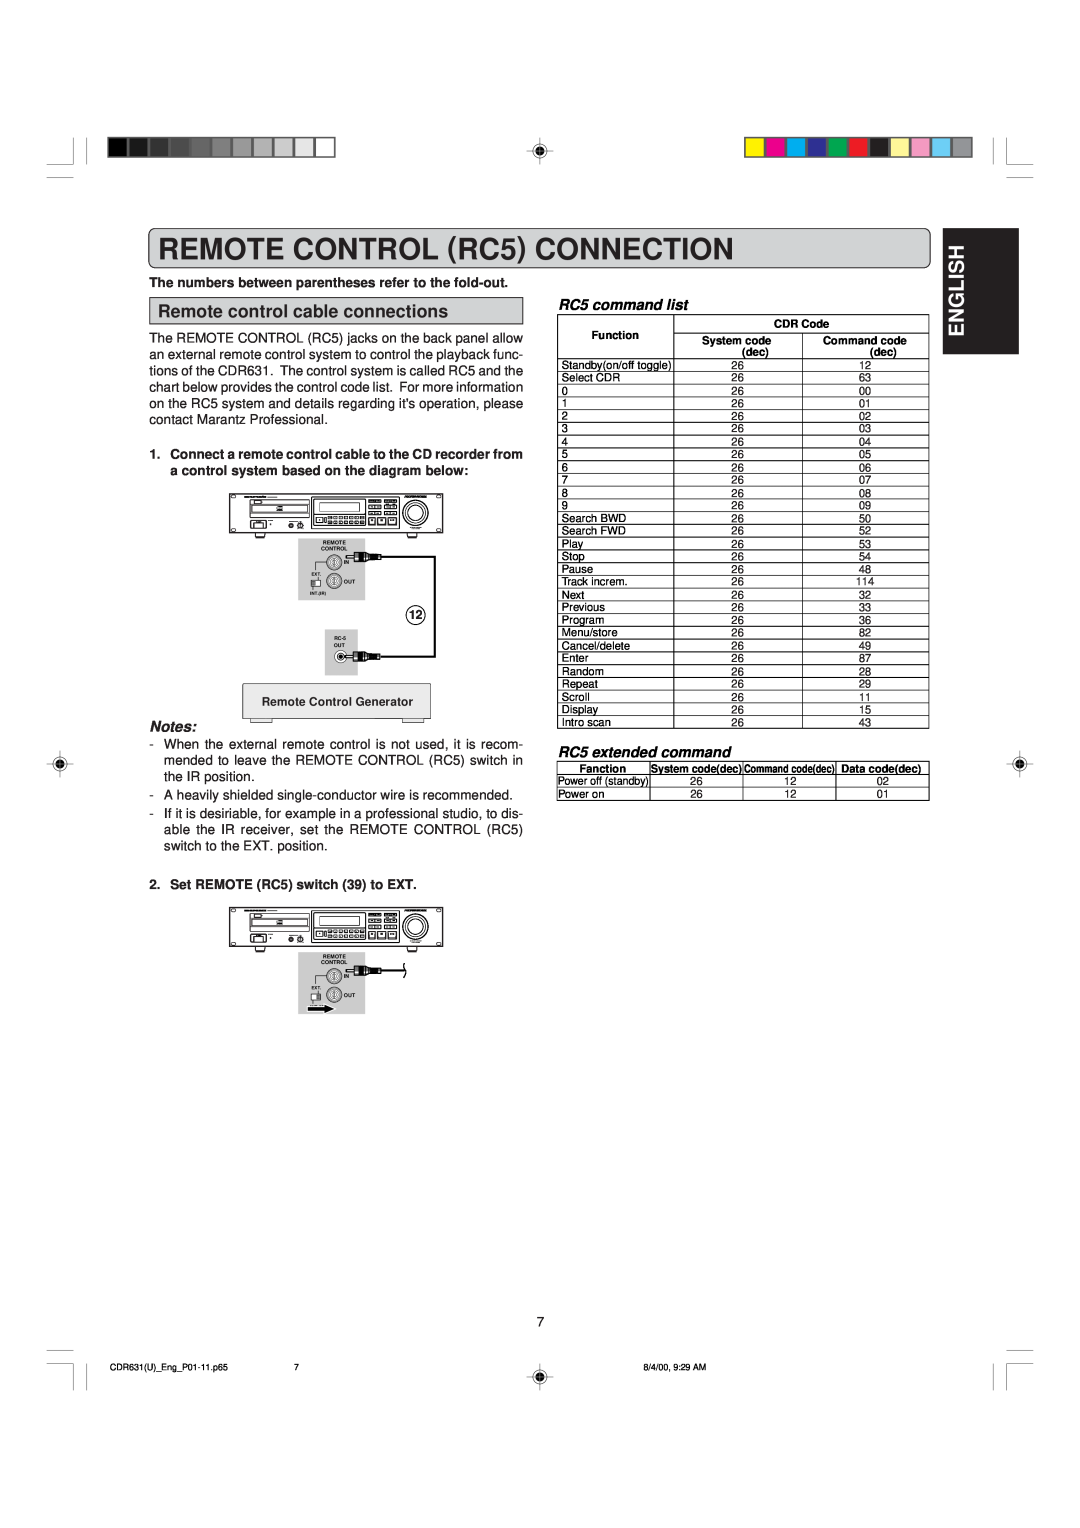 Marantz CDR631 manual REMOTE CONTROL RC5 CONNECTION, English, RC5 command list, RC5 extended command 